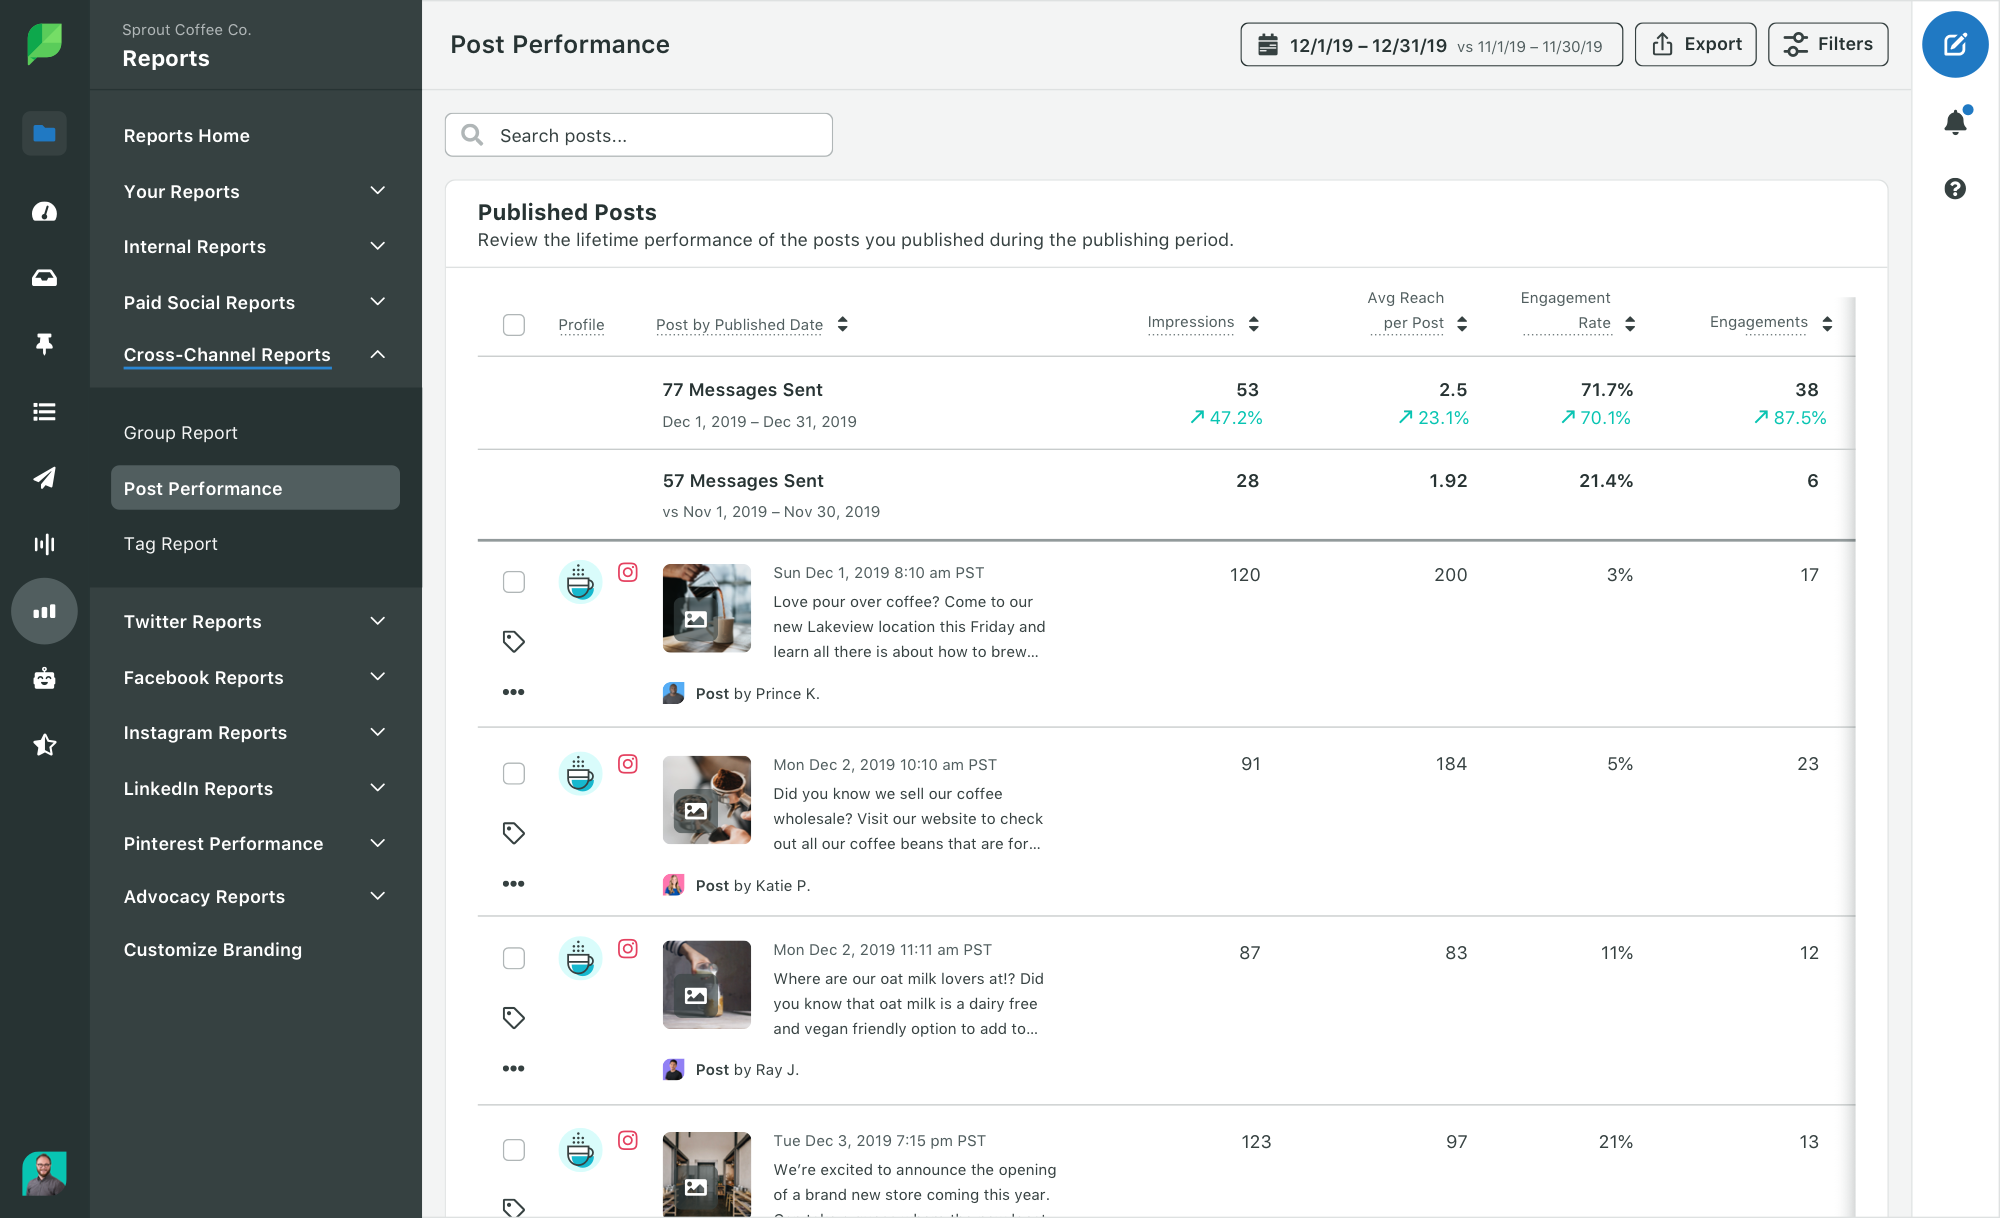 Sprout's Post Performance Report, which can be filtered to show popular posts by platform for more granular insights.